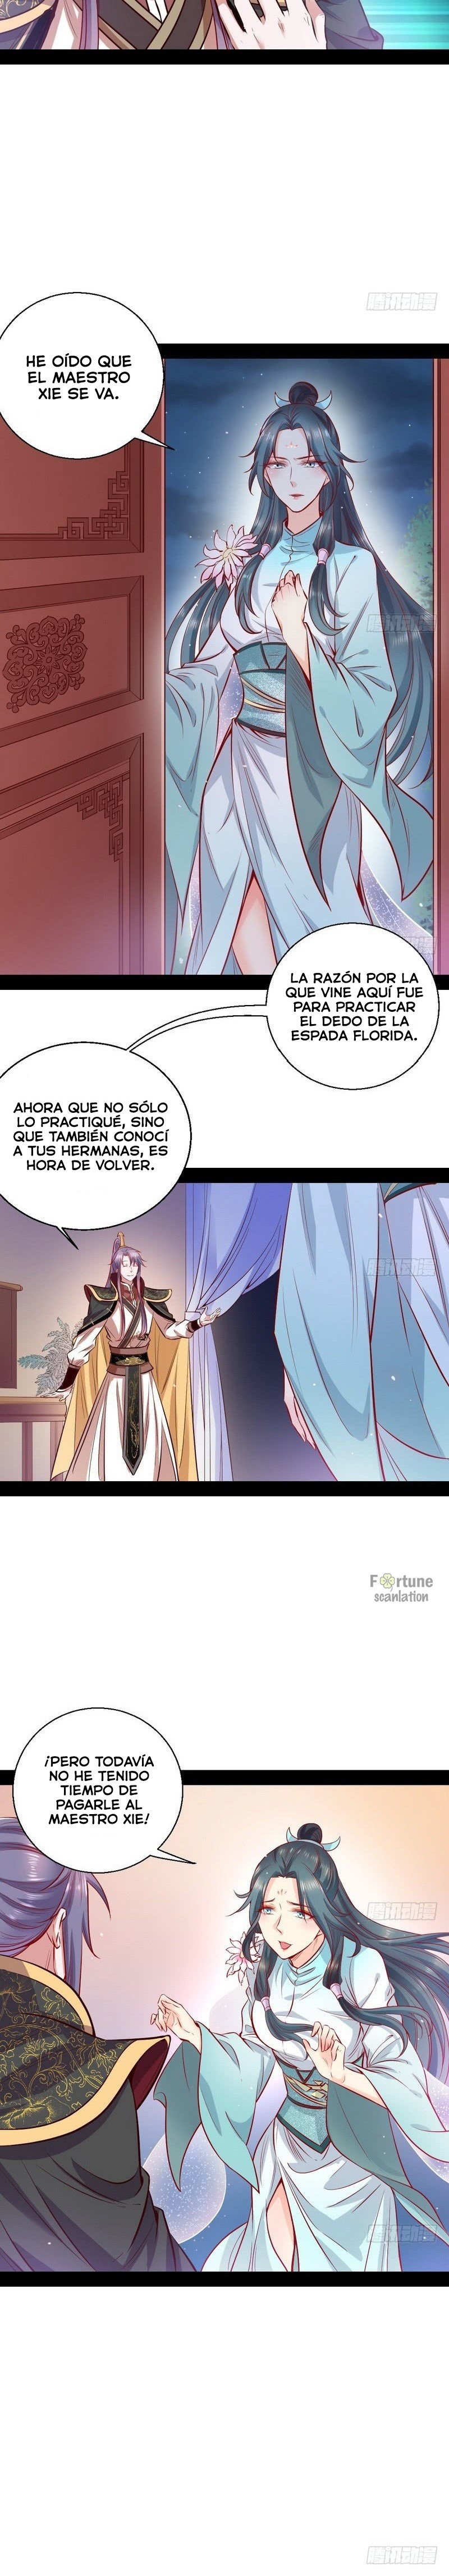 Manga Soy un dios maligno Chapter 29 image number 3